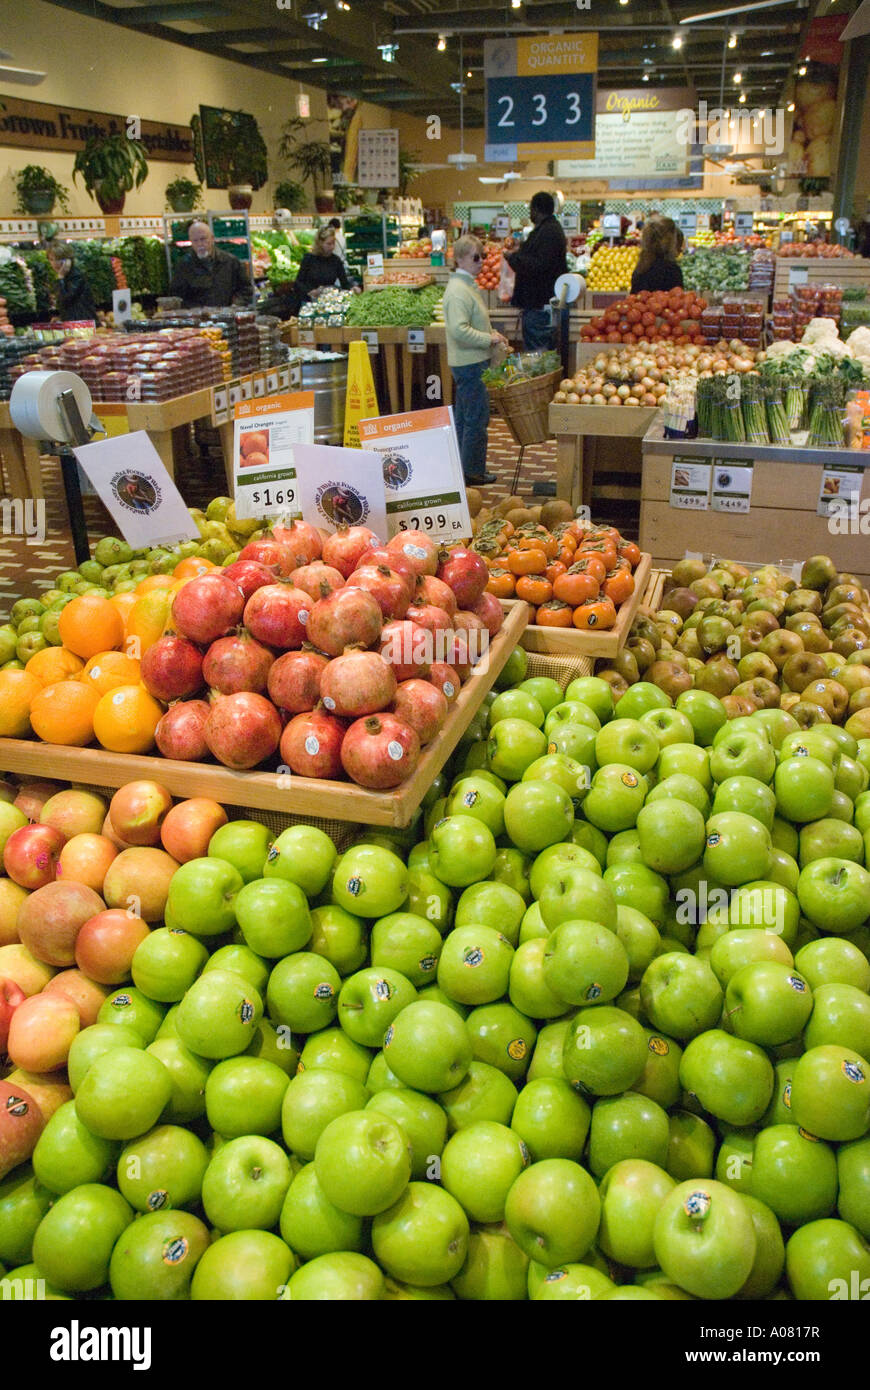 https://c8.alamy.com/comp/A0817R/organic-fruit-and-vegetables-whole-foods-market-annapolis-maryland-A0817R.jpg